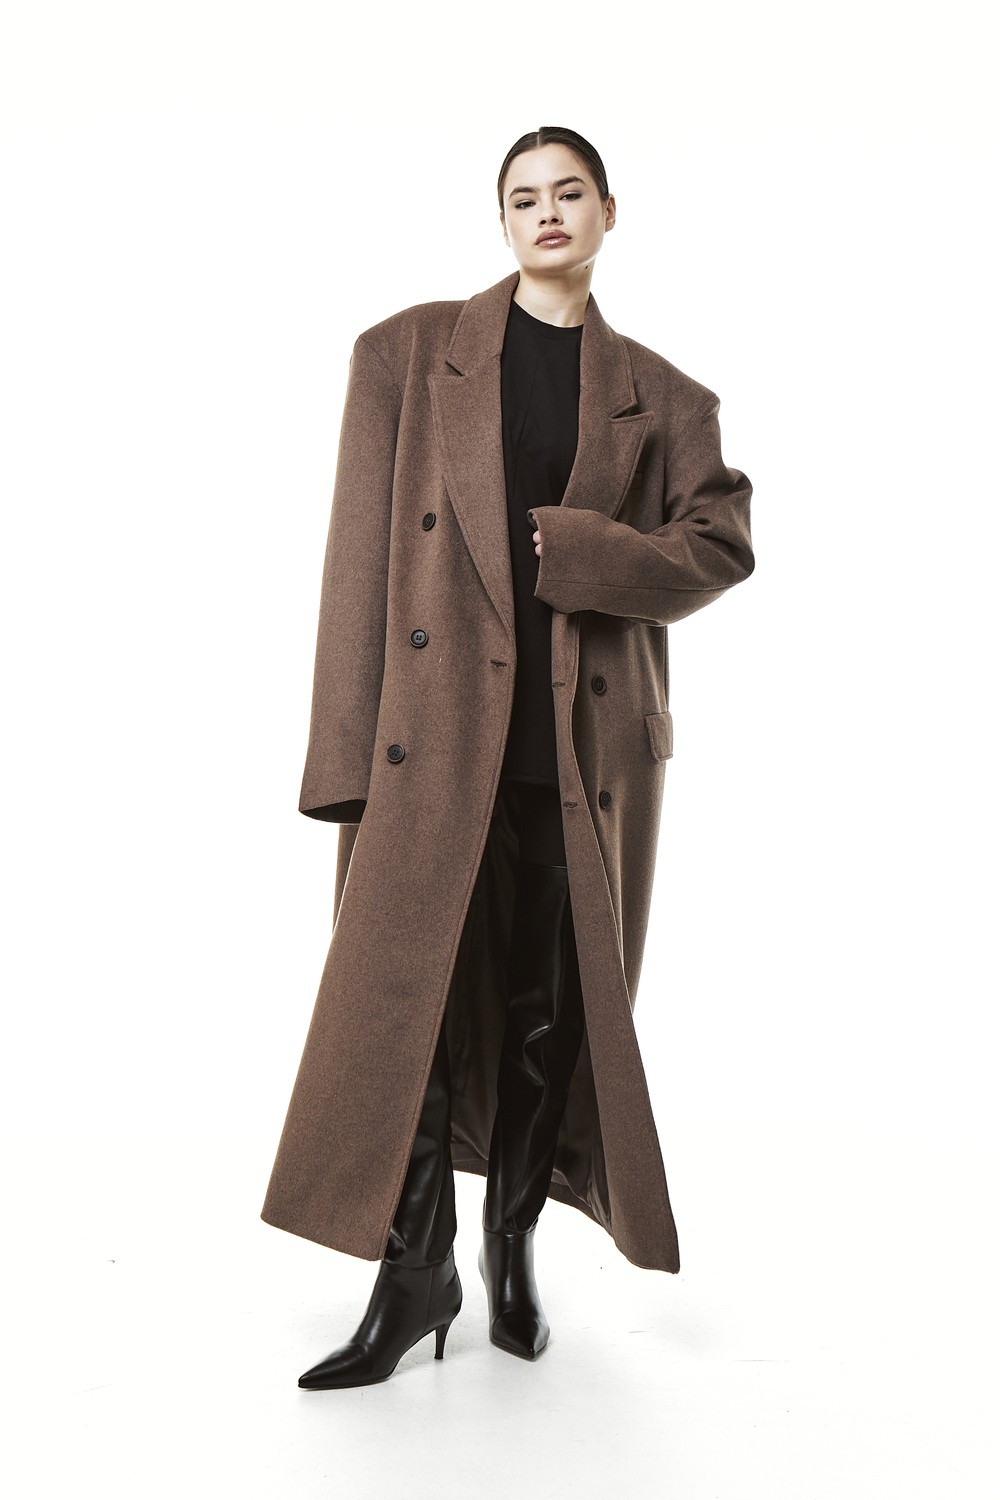 Insulated grandfather's coat in tobacco color